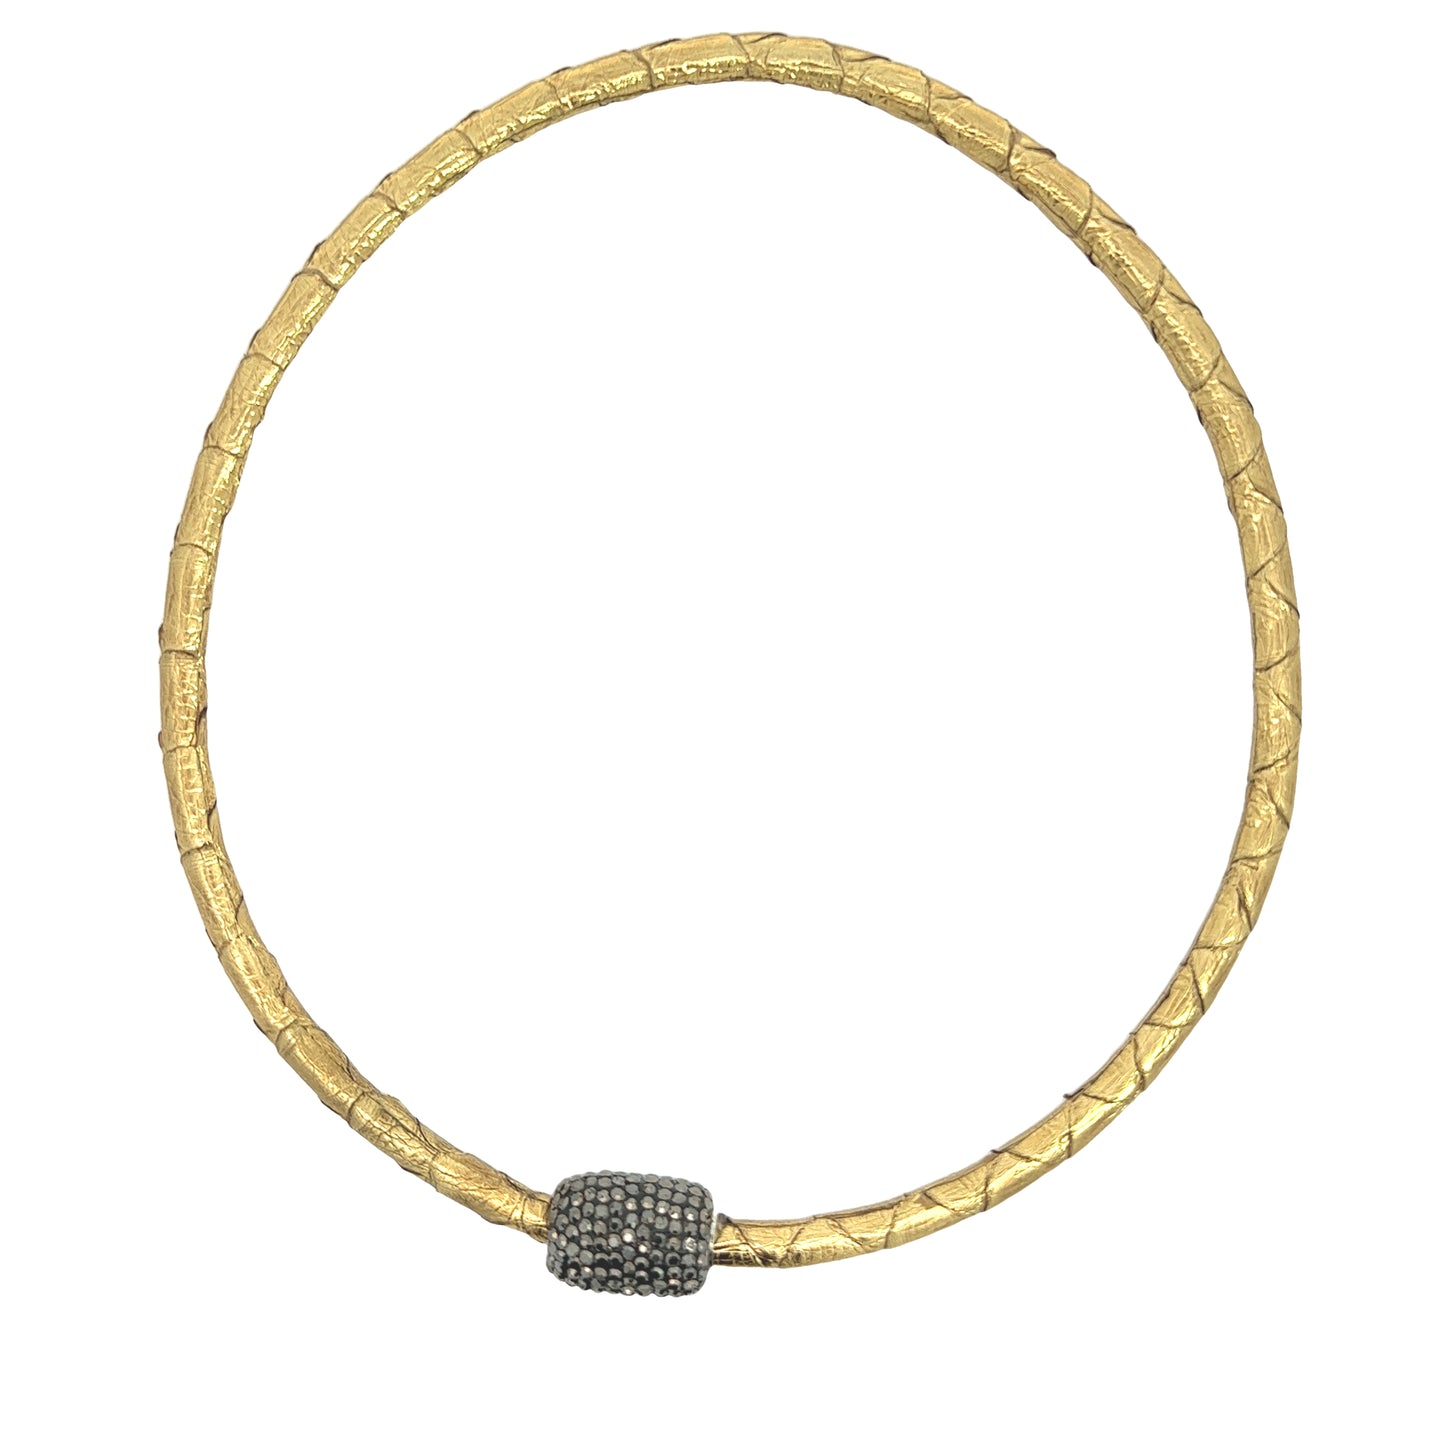 Golden Luxe Leather Choker Necklace - Born To Glam